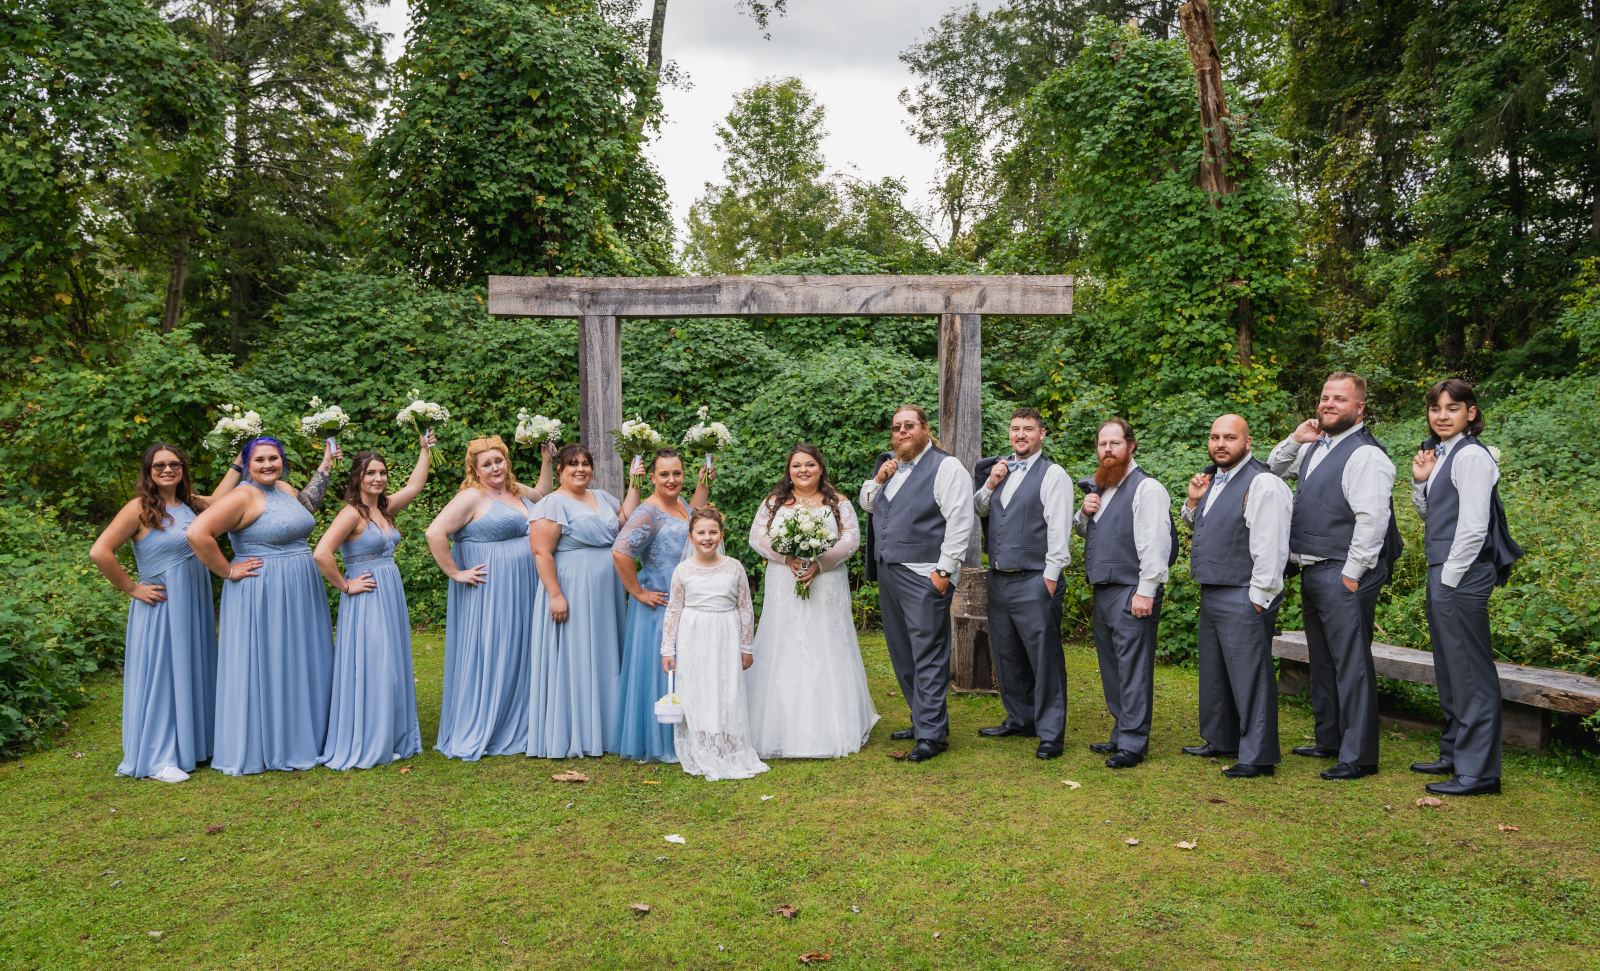 Bride with bridal party, bridesmaids, groomsmen, flower girl, bridal party portrait, flower bouquets in the air, rustic wooden arch, unique bridal party portrait, green, nature, trees, outdoor September wedding ceremony at Westfall Event Center